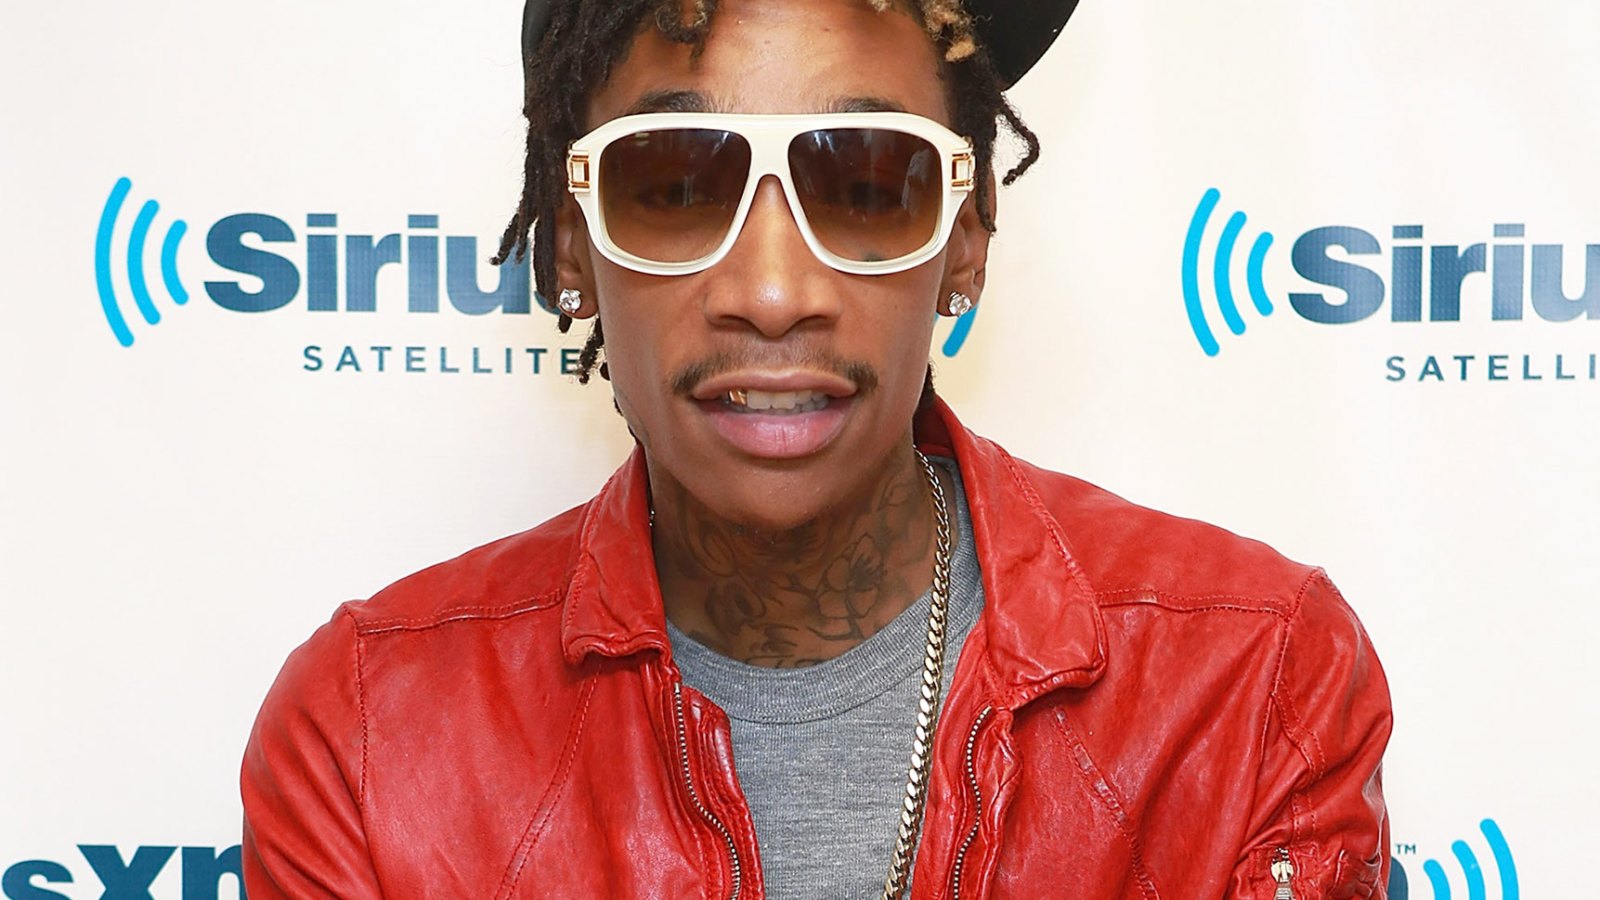 Rapper Wiz Khalifa reveals 25 things about himself to Us Weekly.